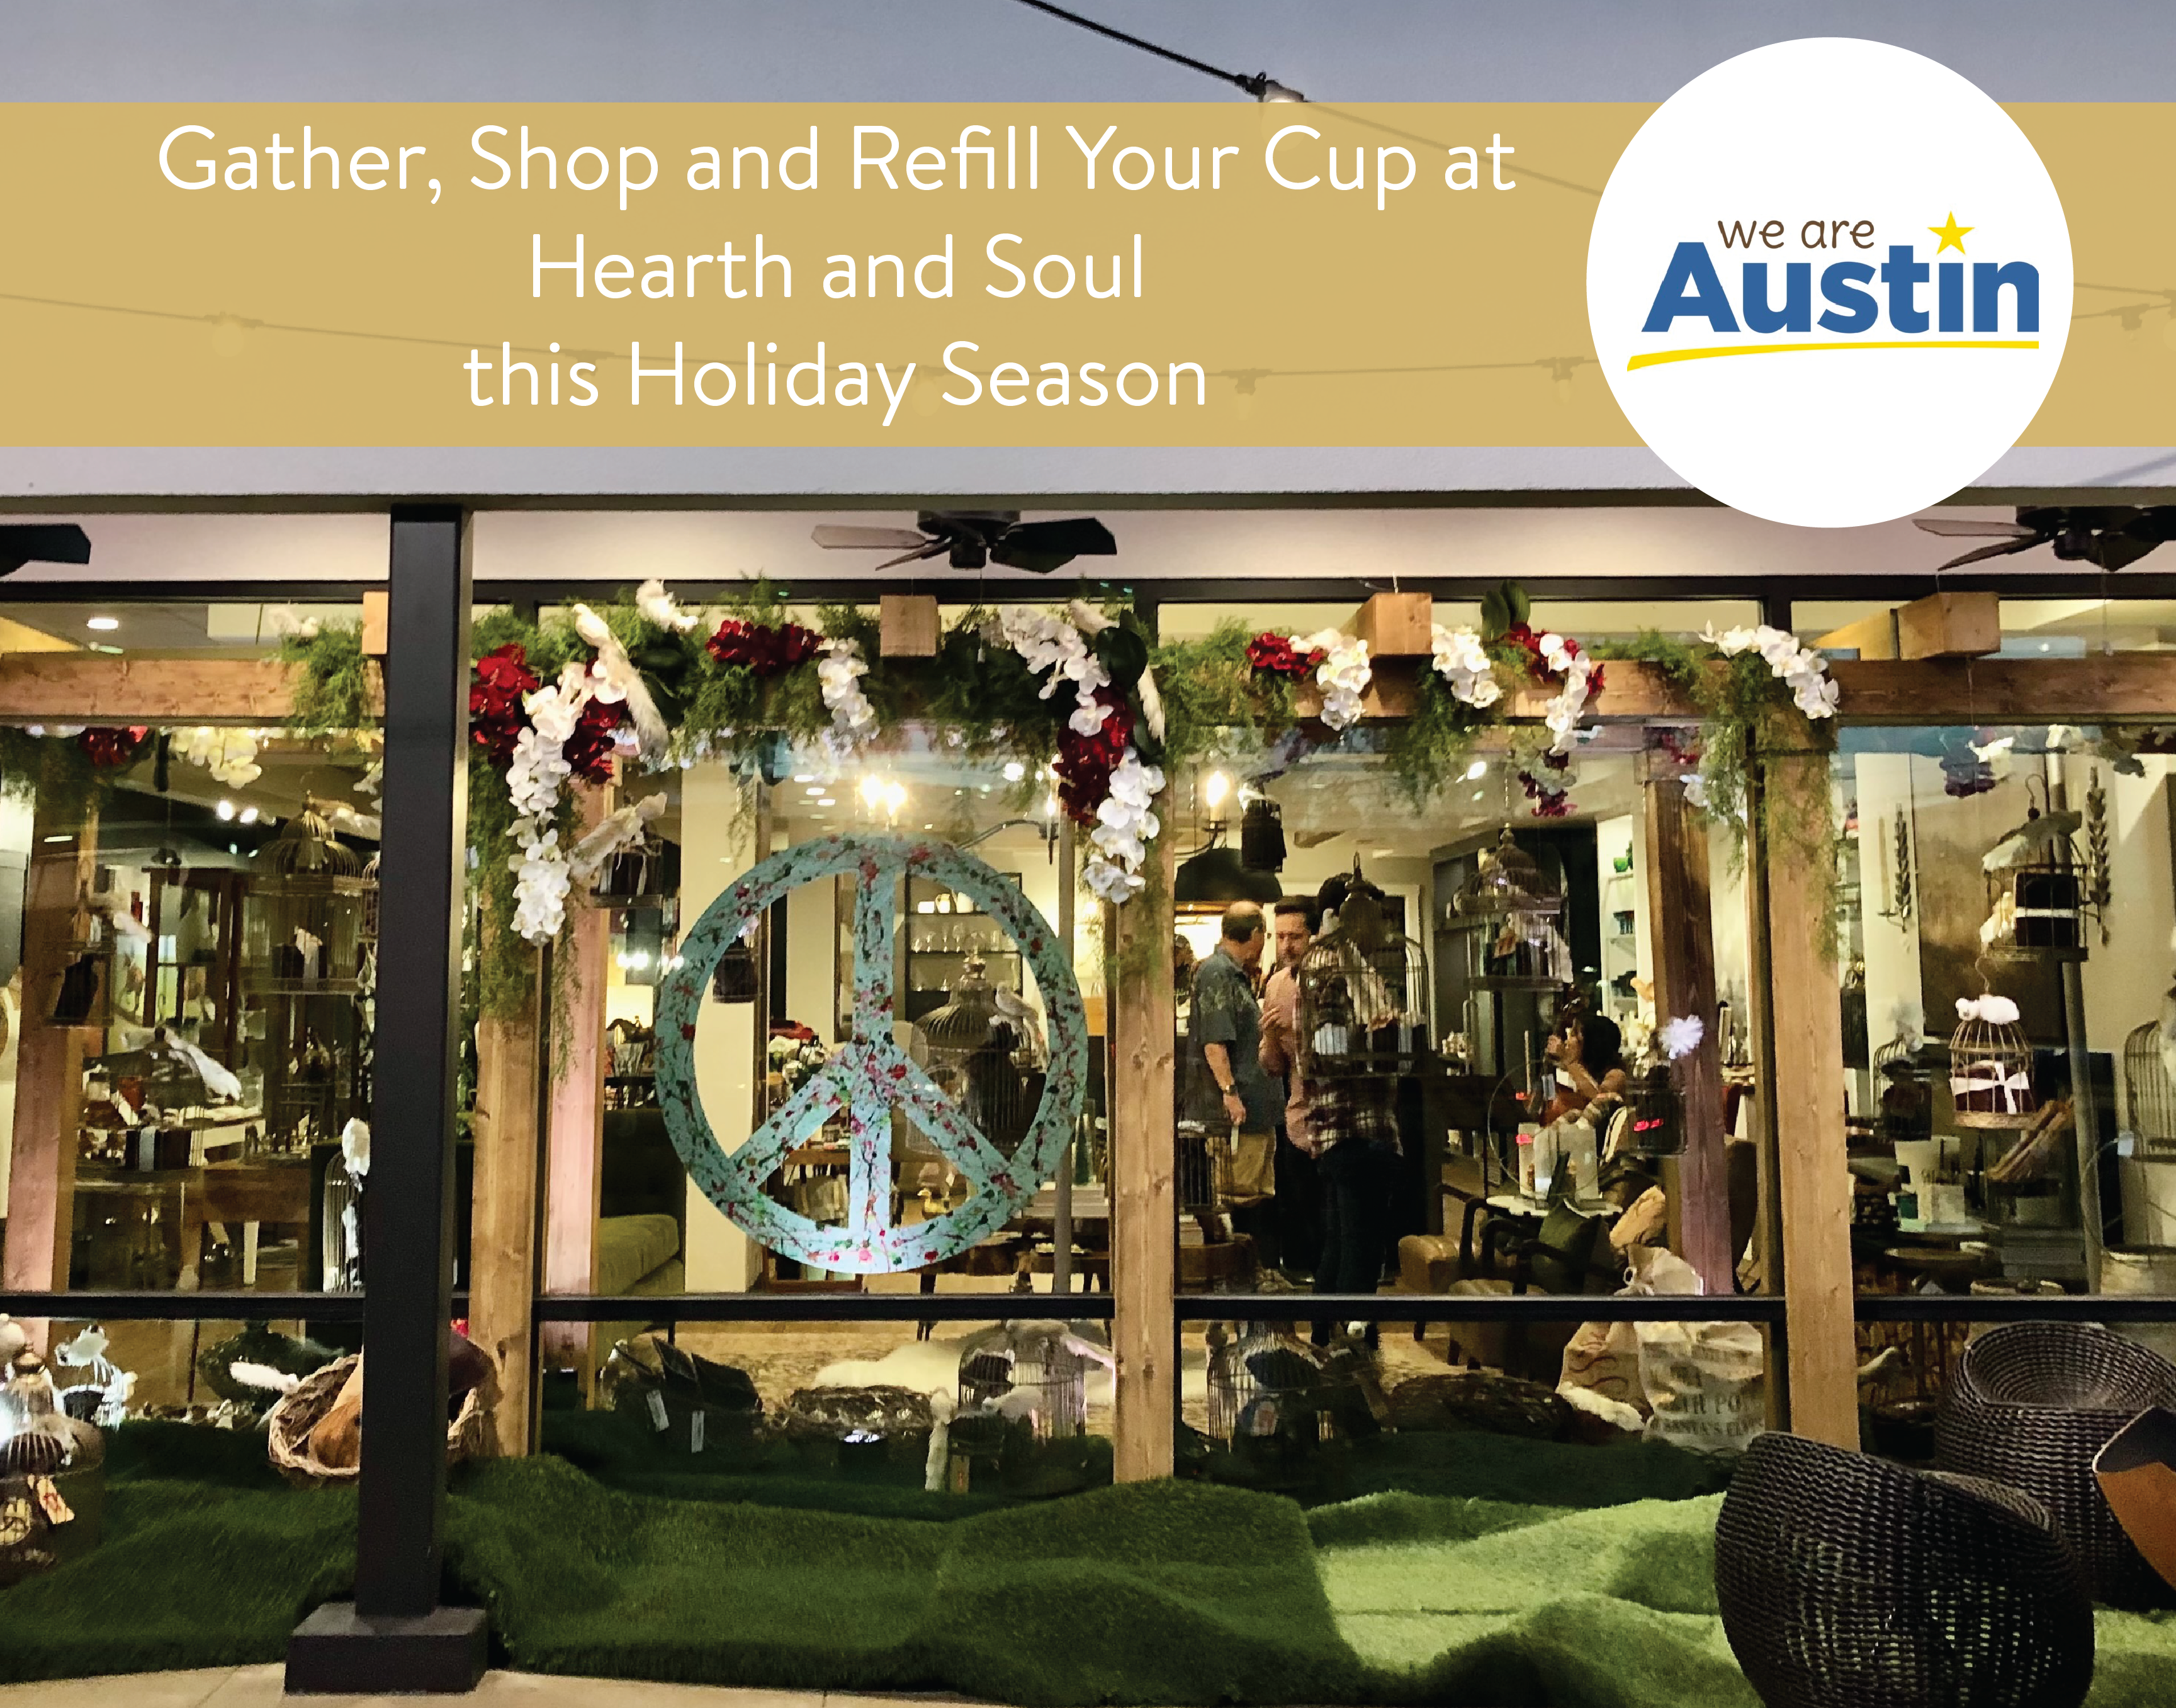 CBS Austin | We are Austin | Gather, Shop and Refill your Cup at Hearth and Soul